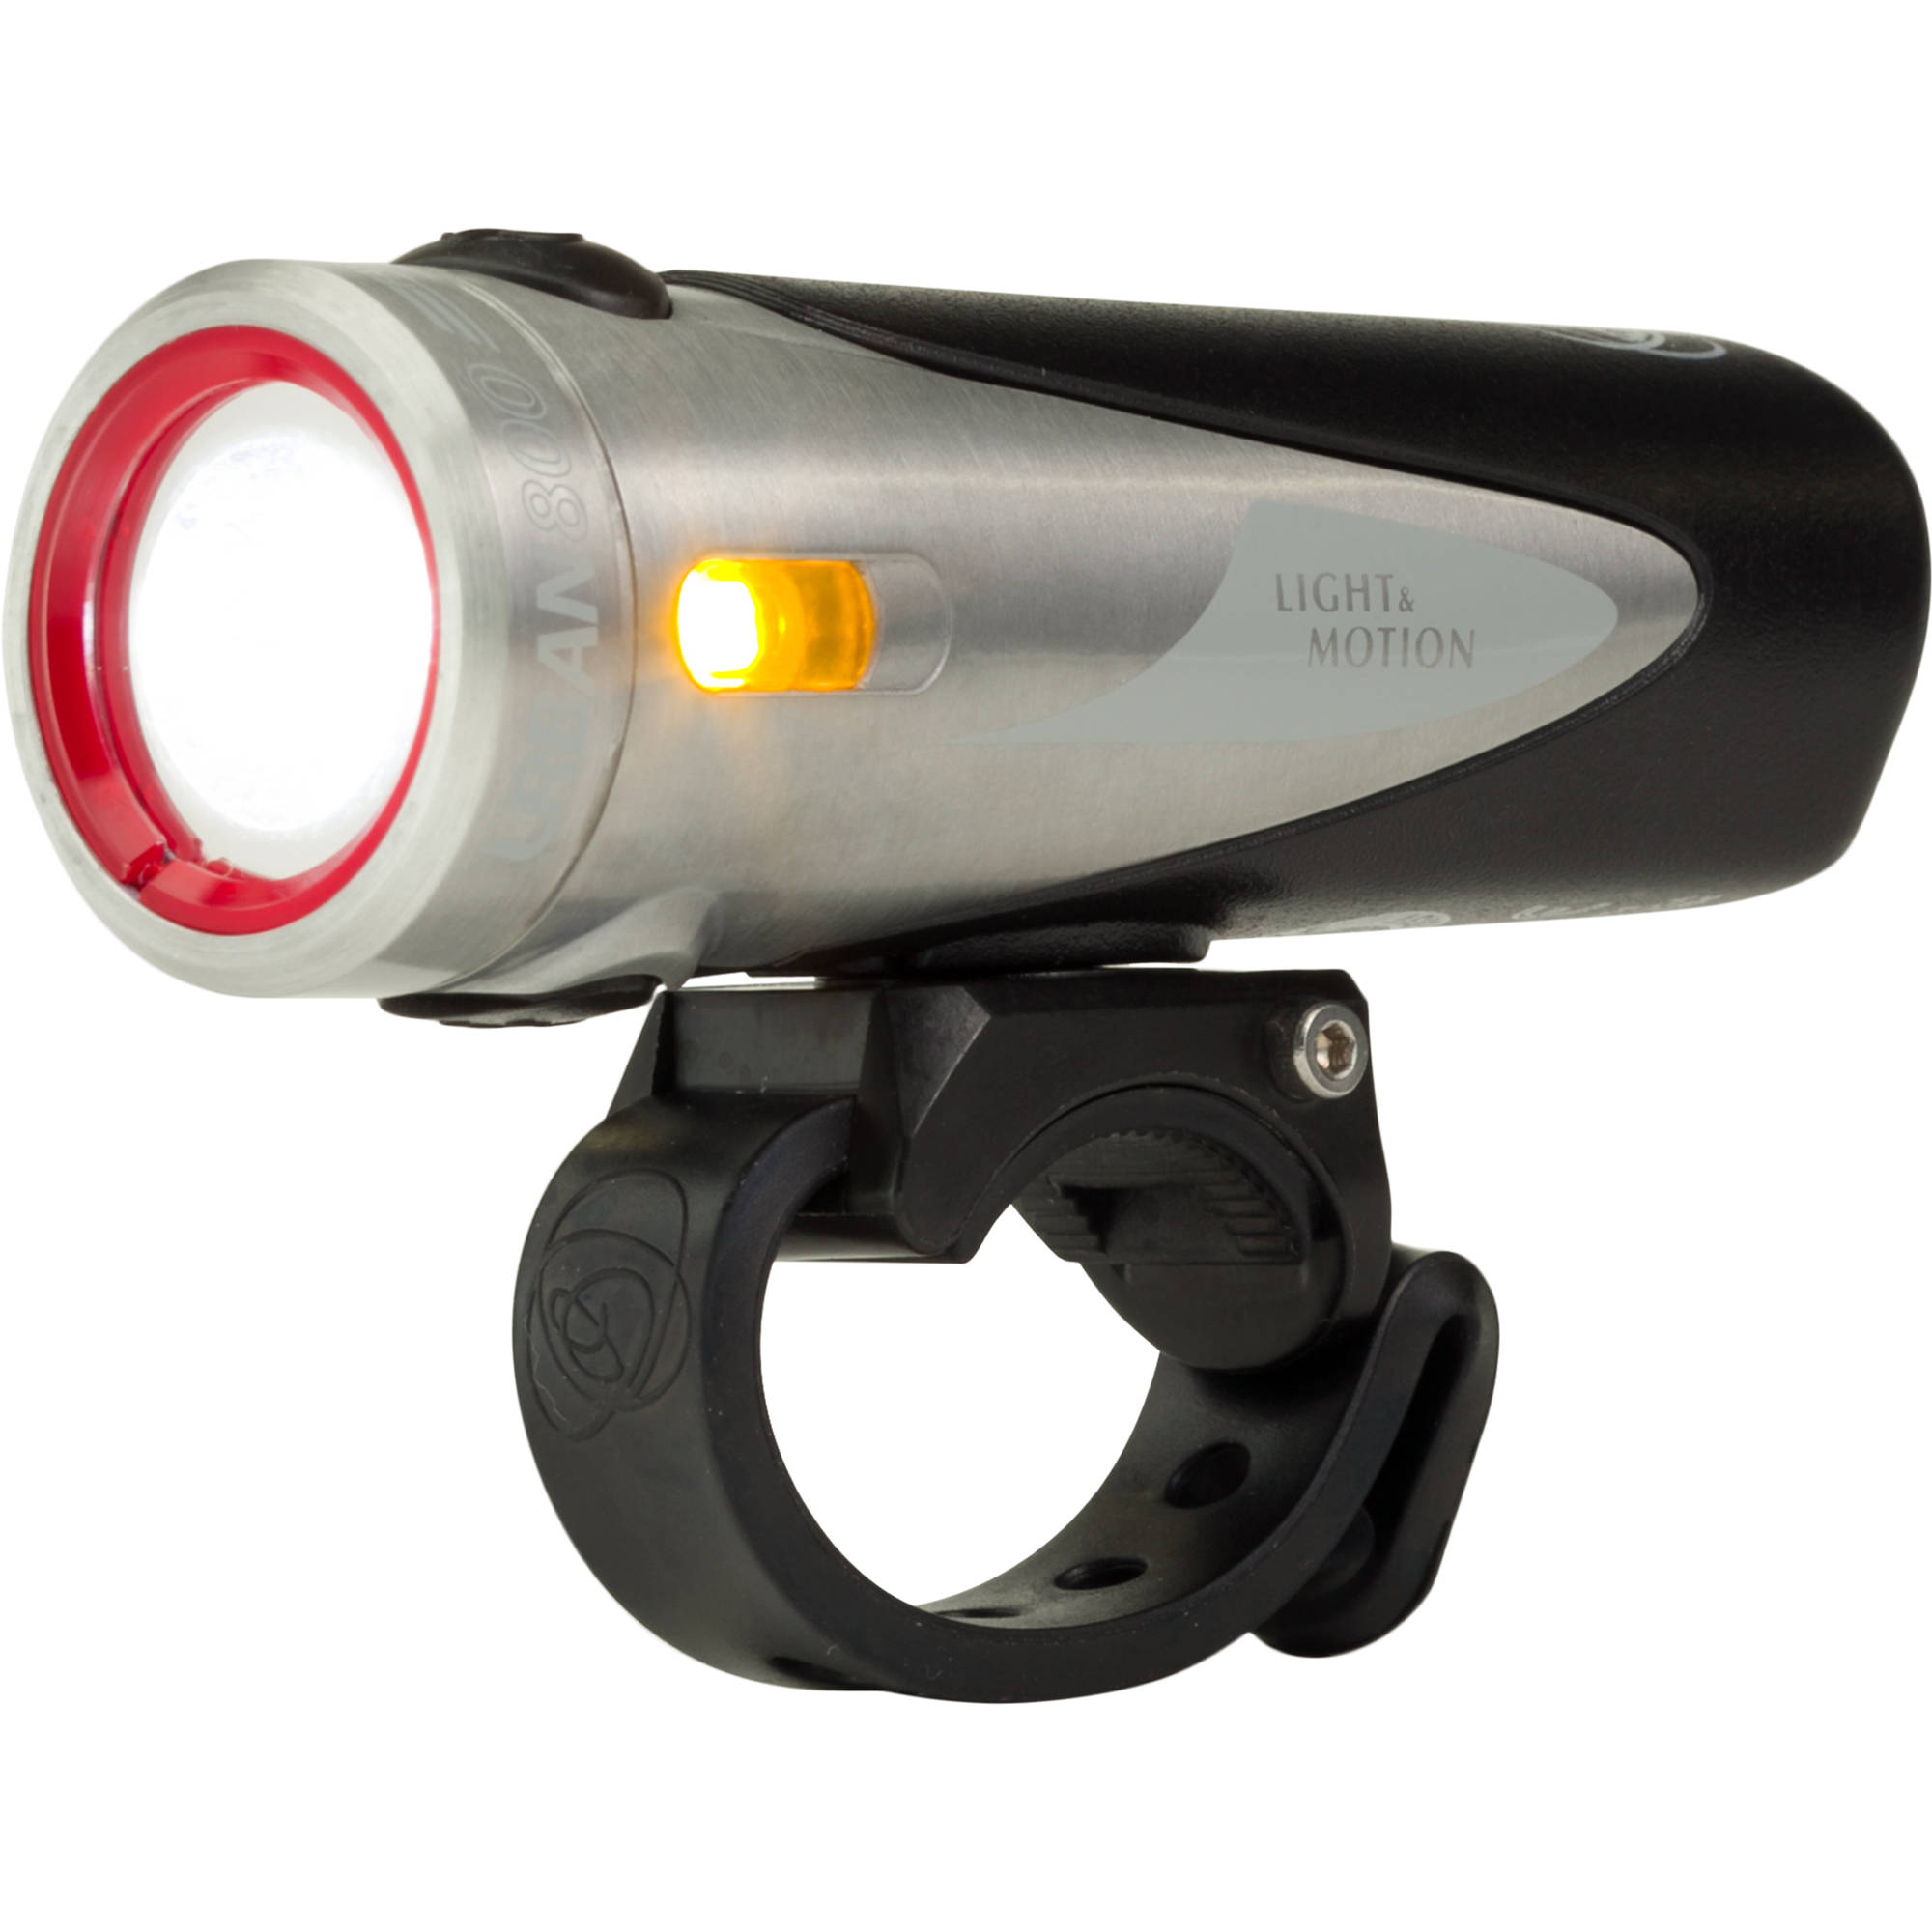 light and motion urban 800 review